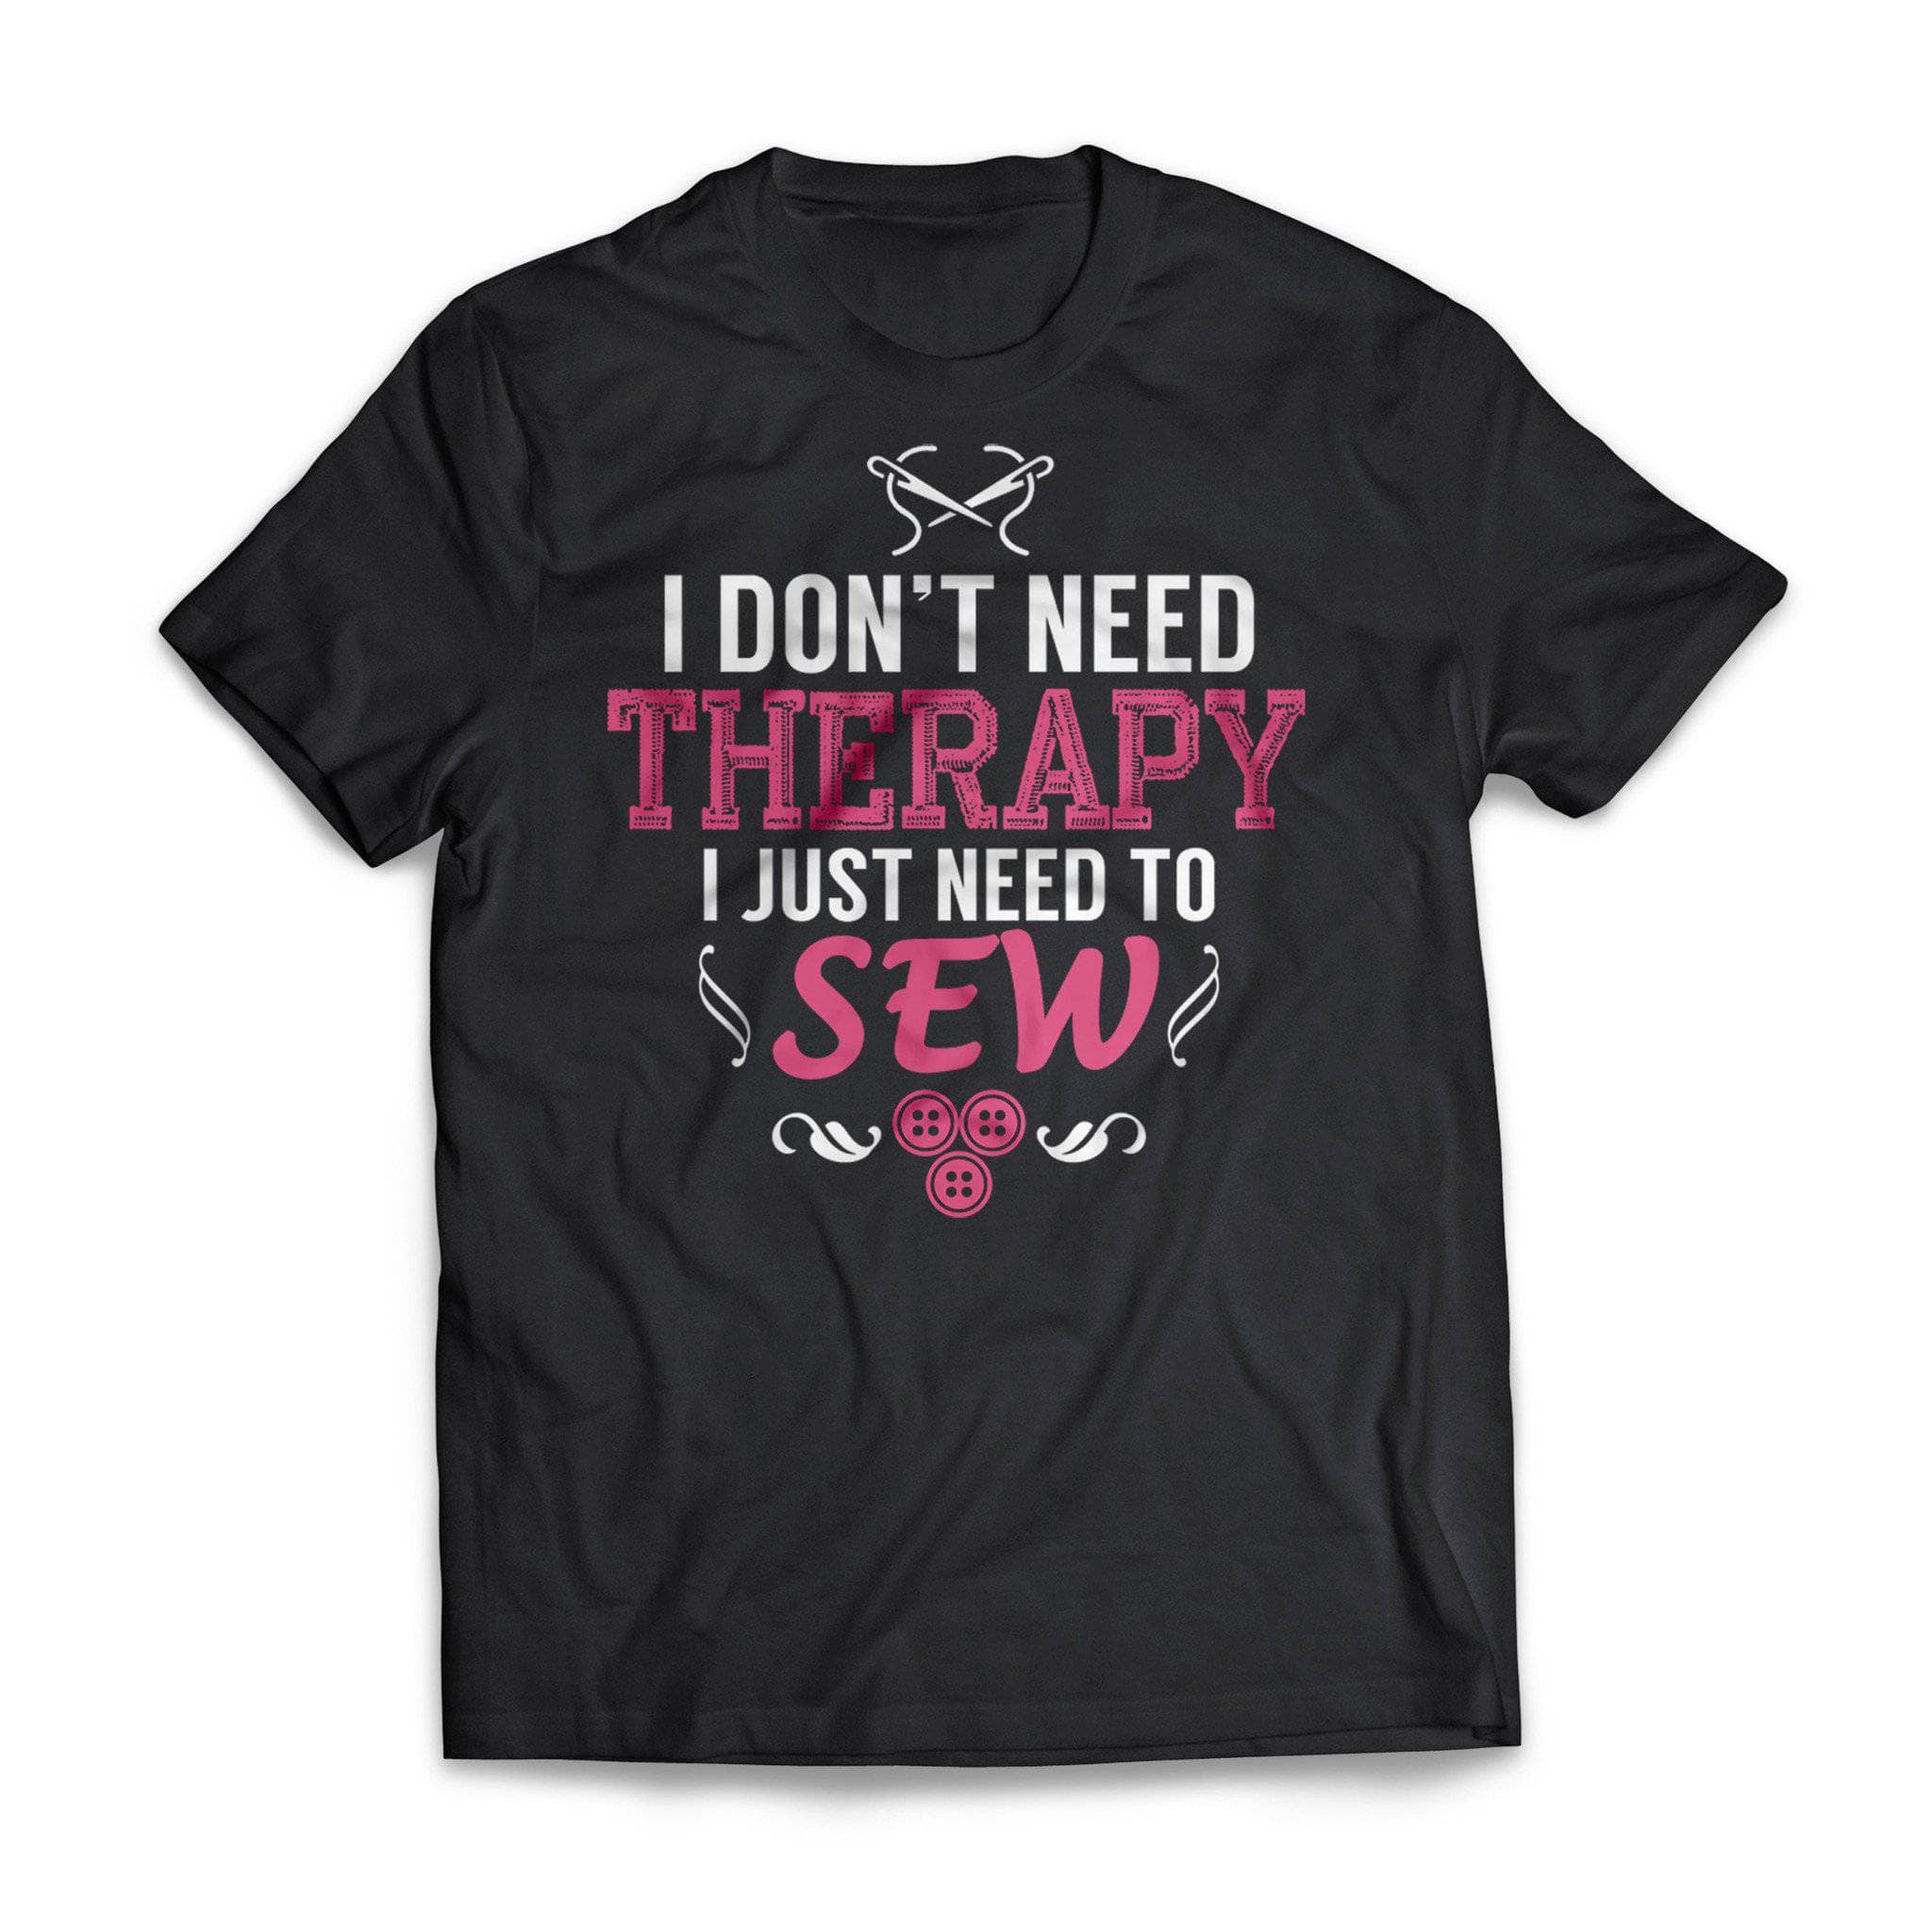 Don't Need Therapy Short Sleeve Tee